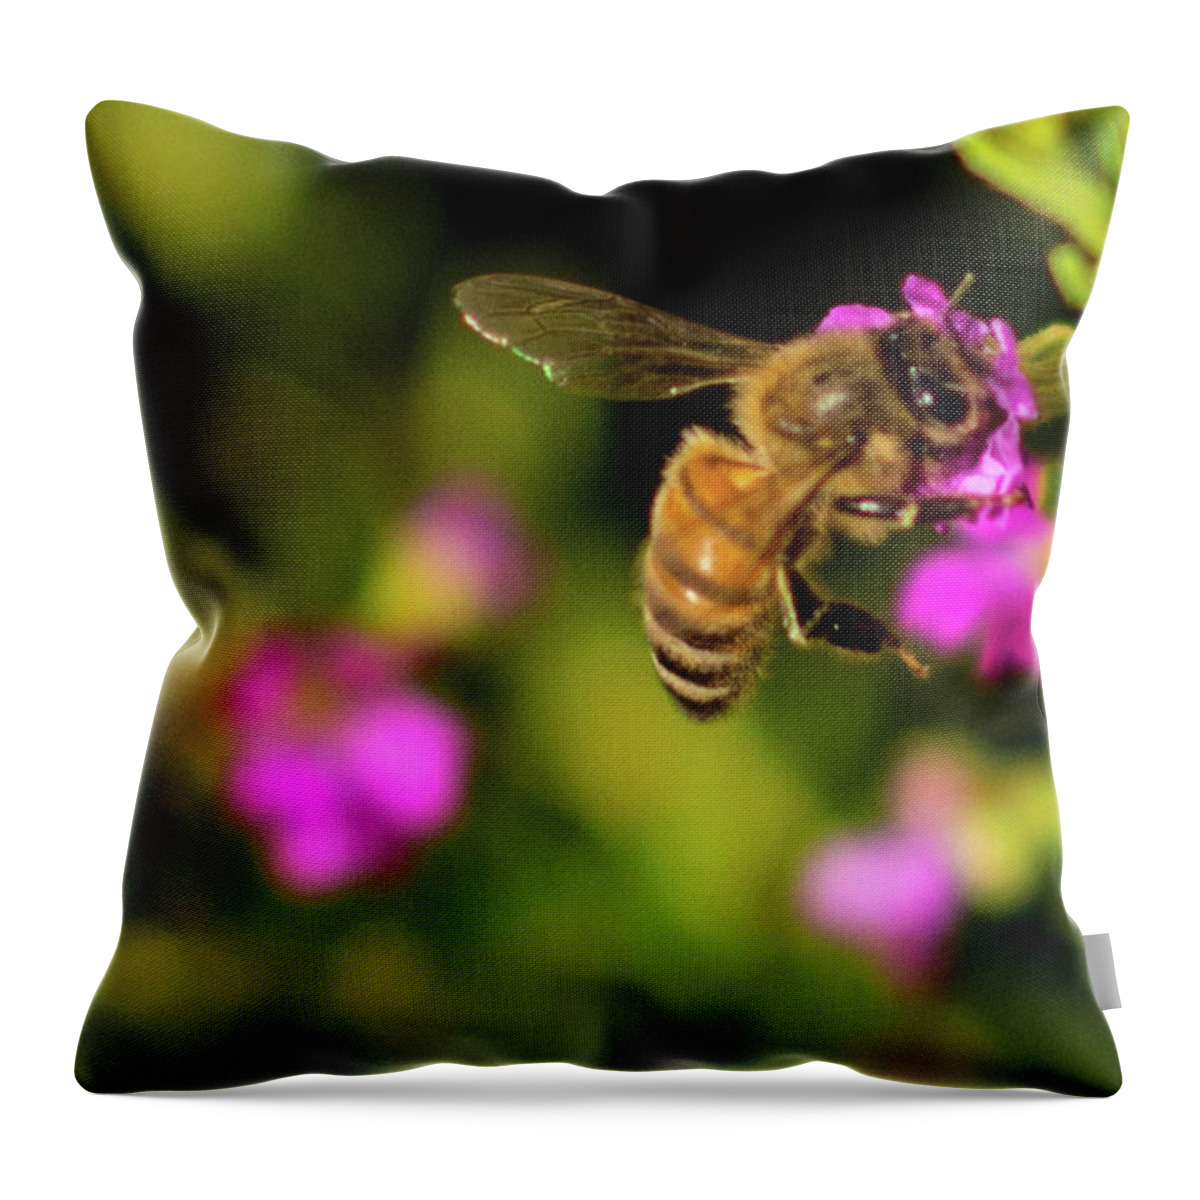 Flowers Throw Pillow featuring the photograph So Many Flowers... by Ed Clark